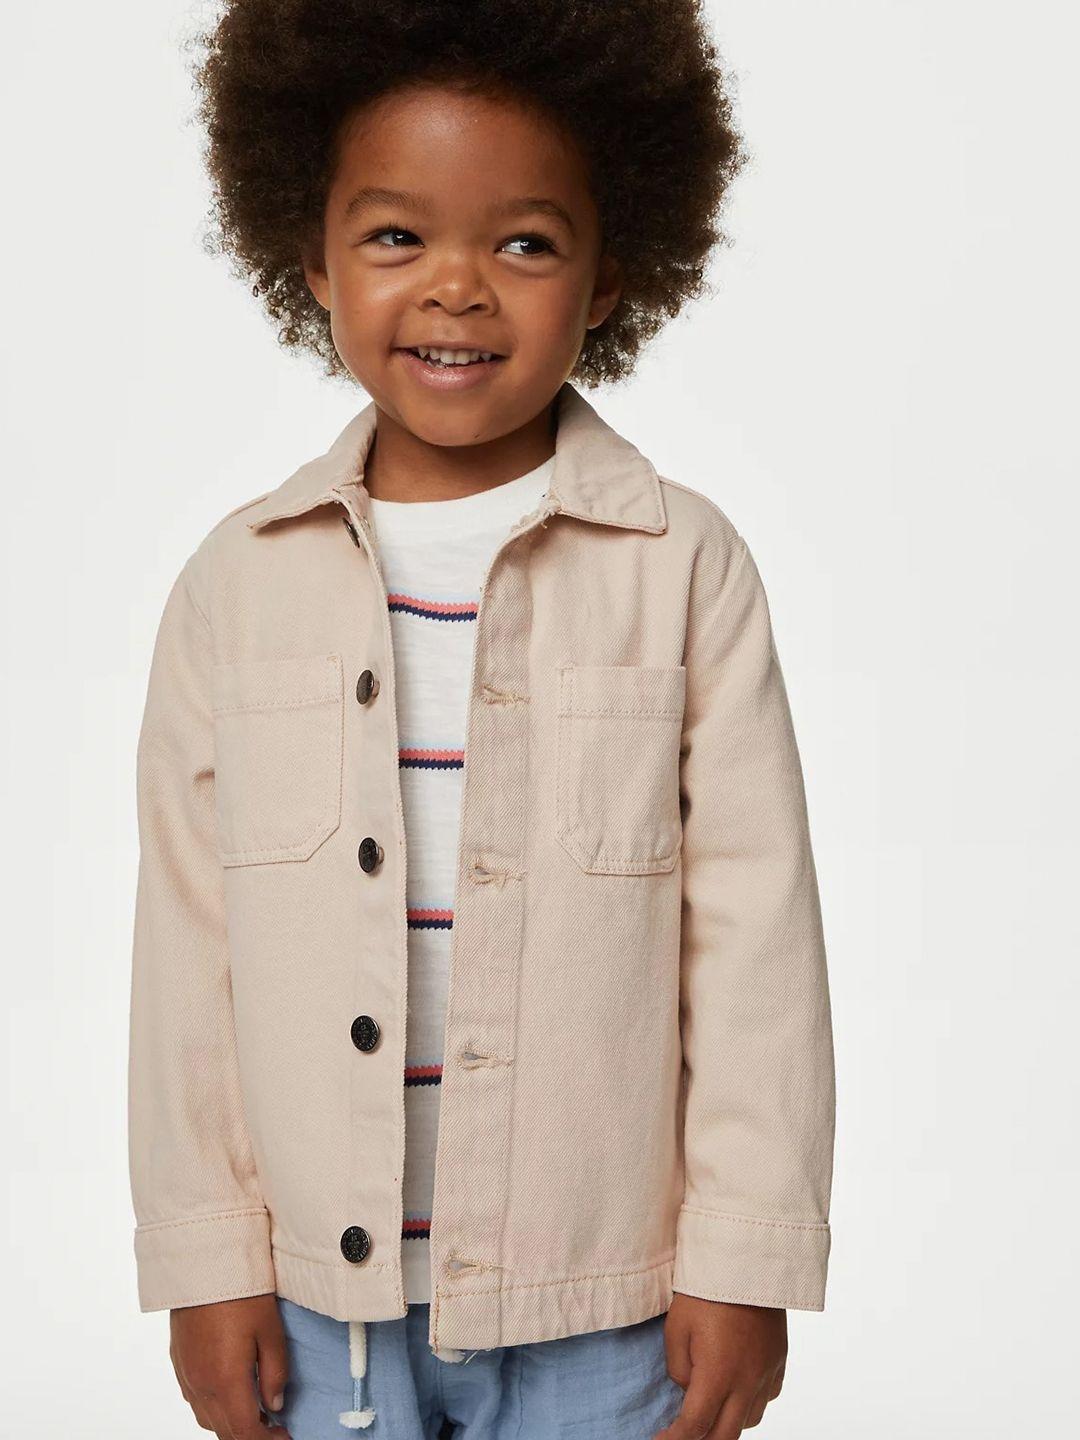 marks & spencer boys casual pure cotton shacket